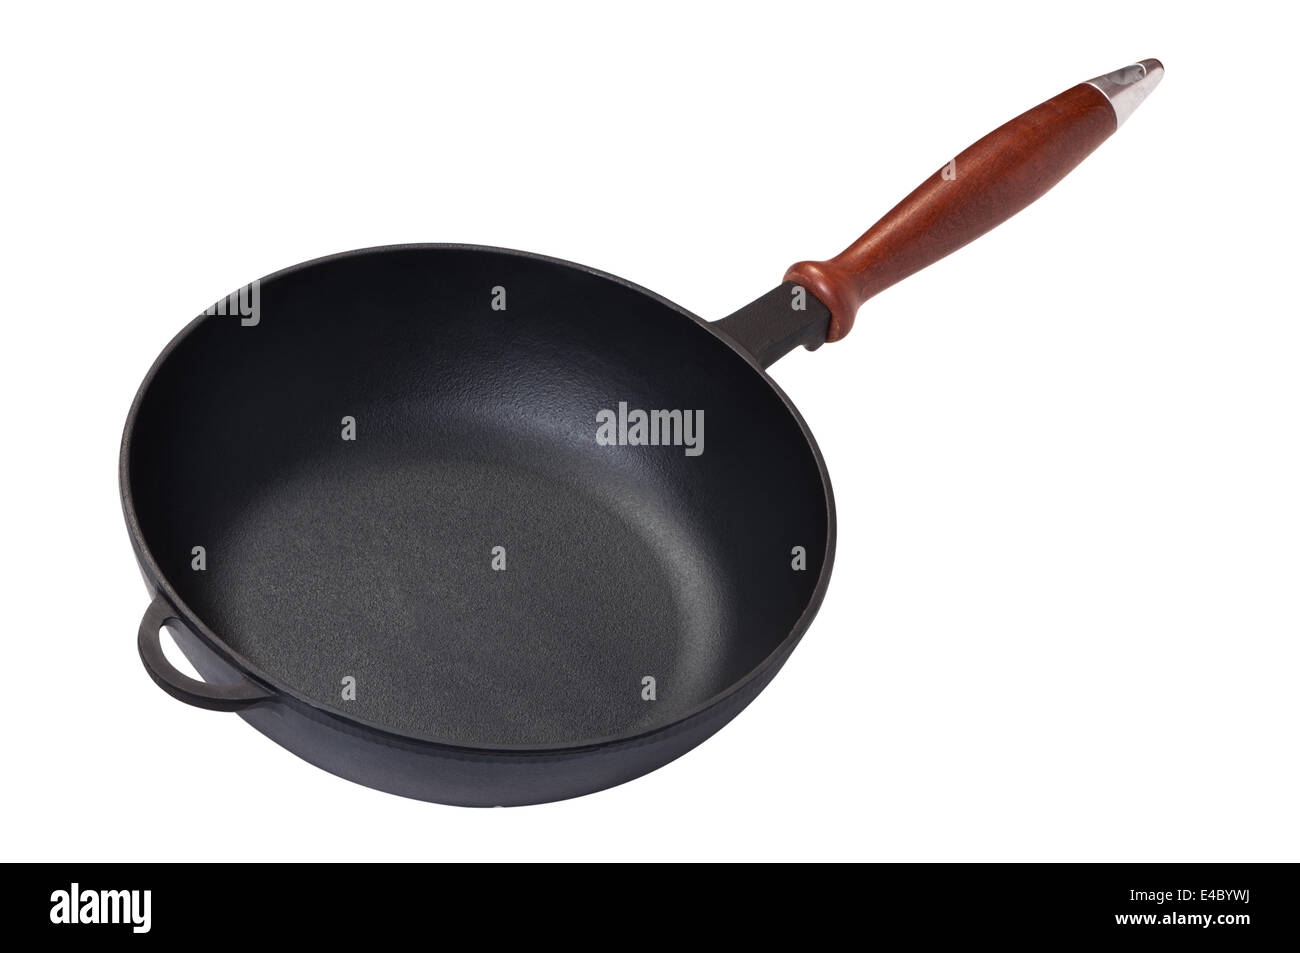 Frying pan on white background. Stock Photo